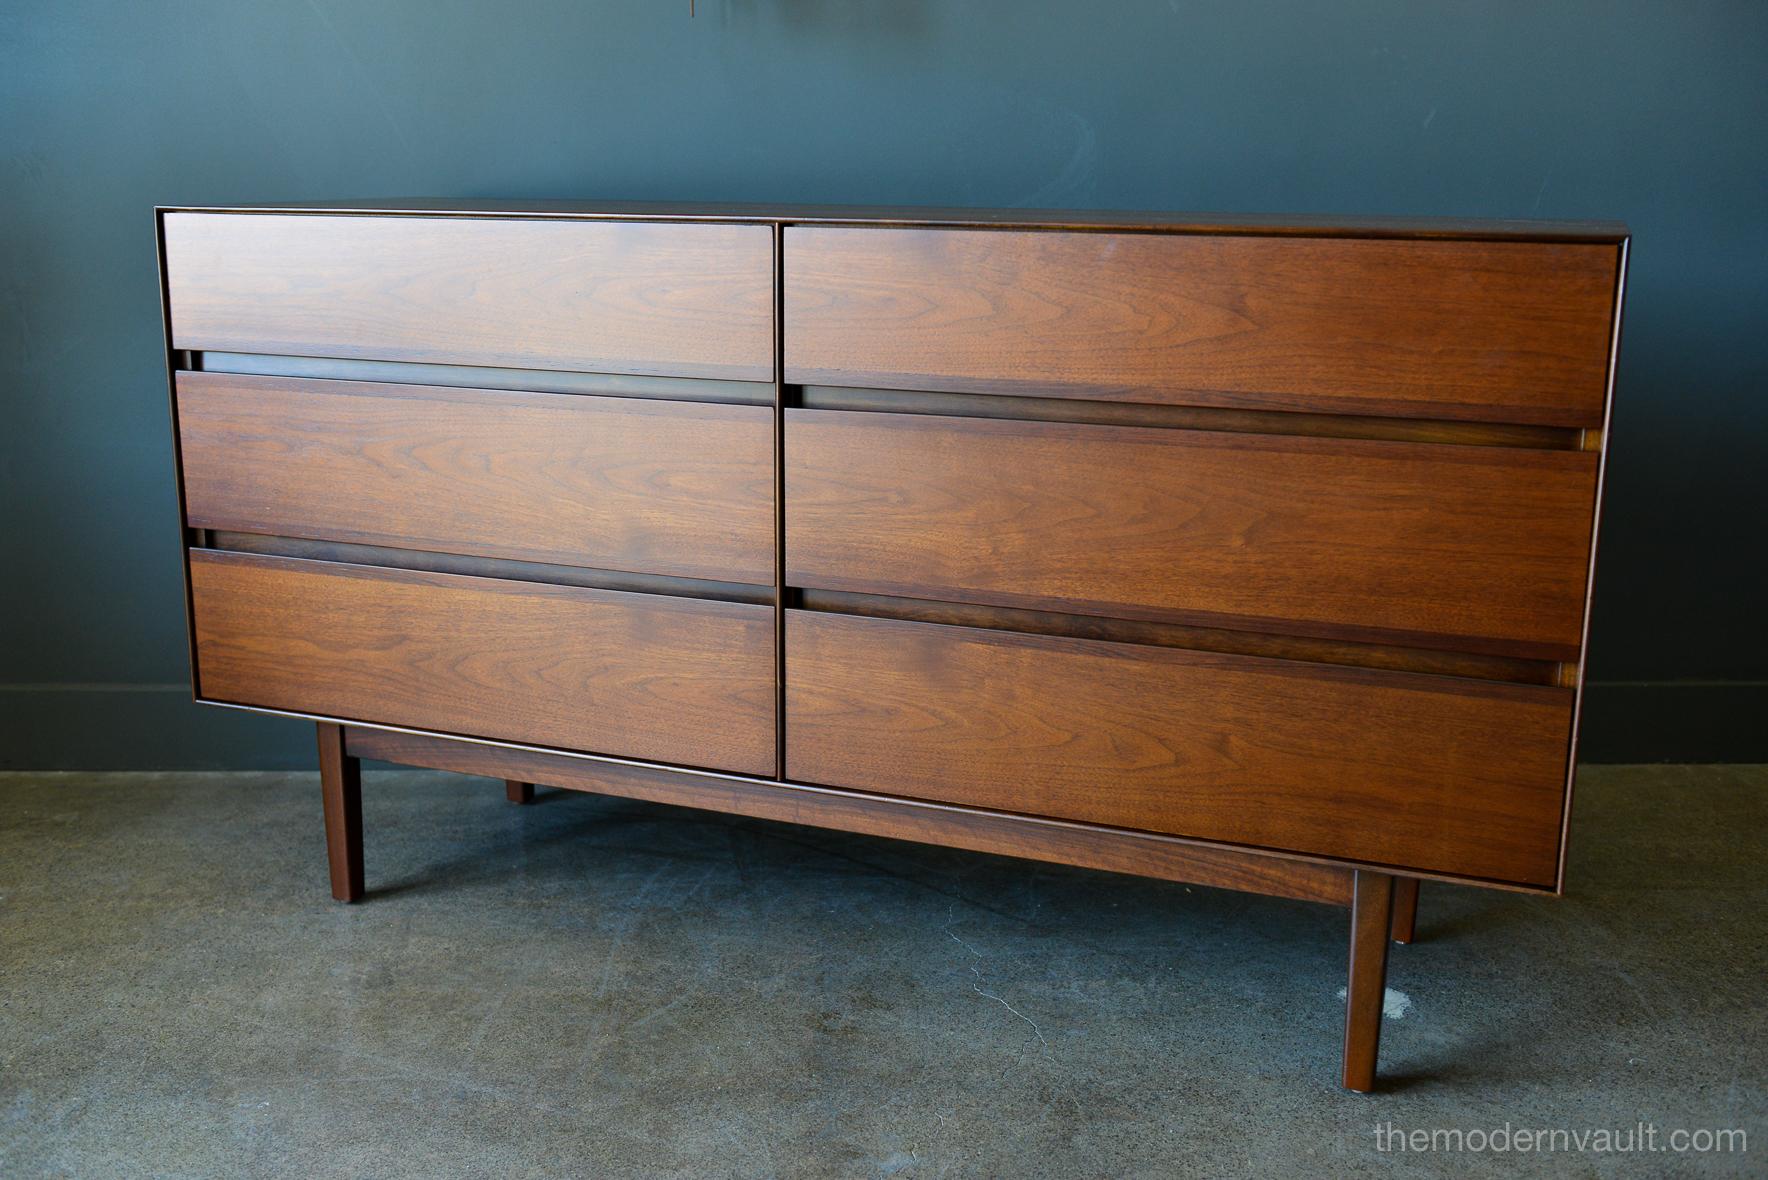 Walnut 6-drawer dresser, circa 1960 by Stanley Furniture. Classic and simple design, the walnut has a beautiful grain and has been professionally restored in showroom condition. Contrasting edging. Smooth gliding drawers with dovetail